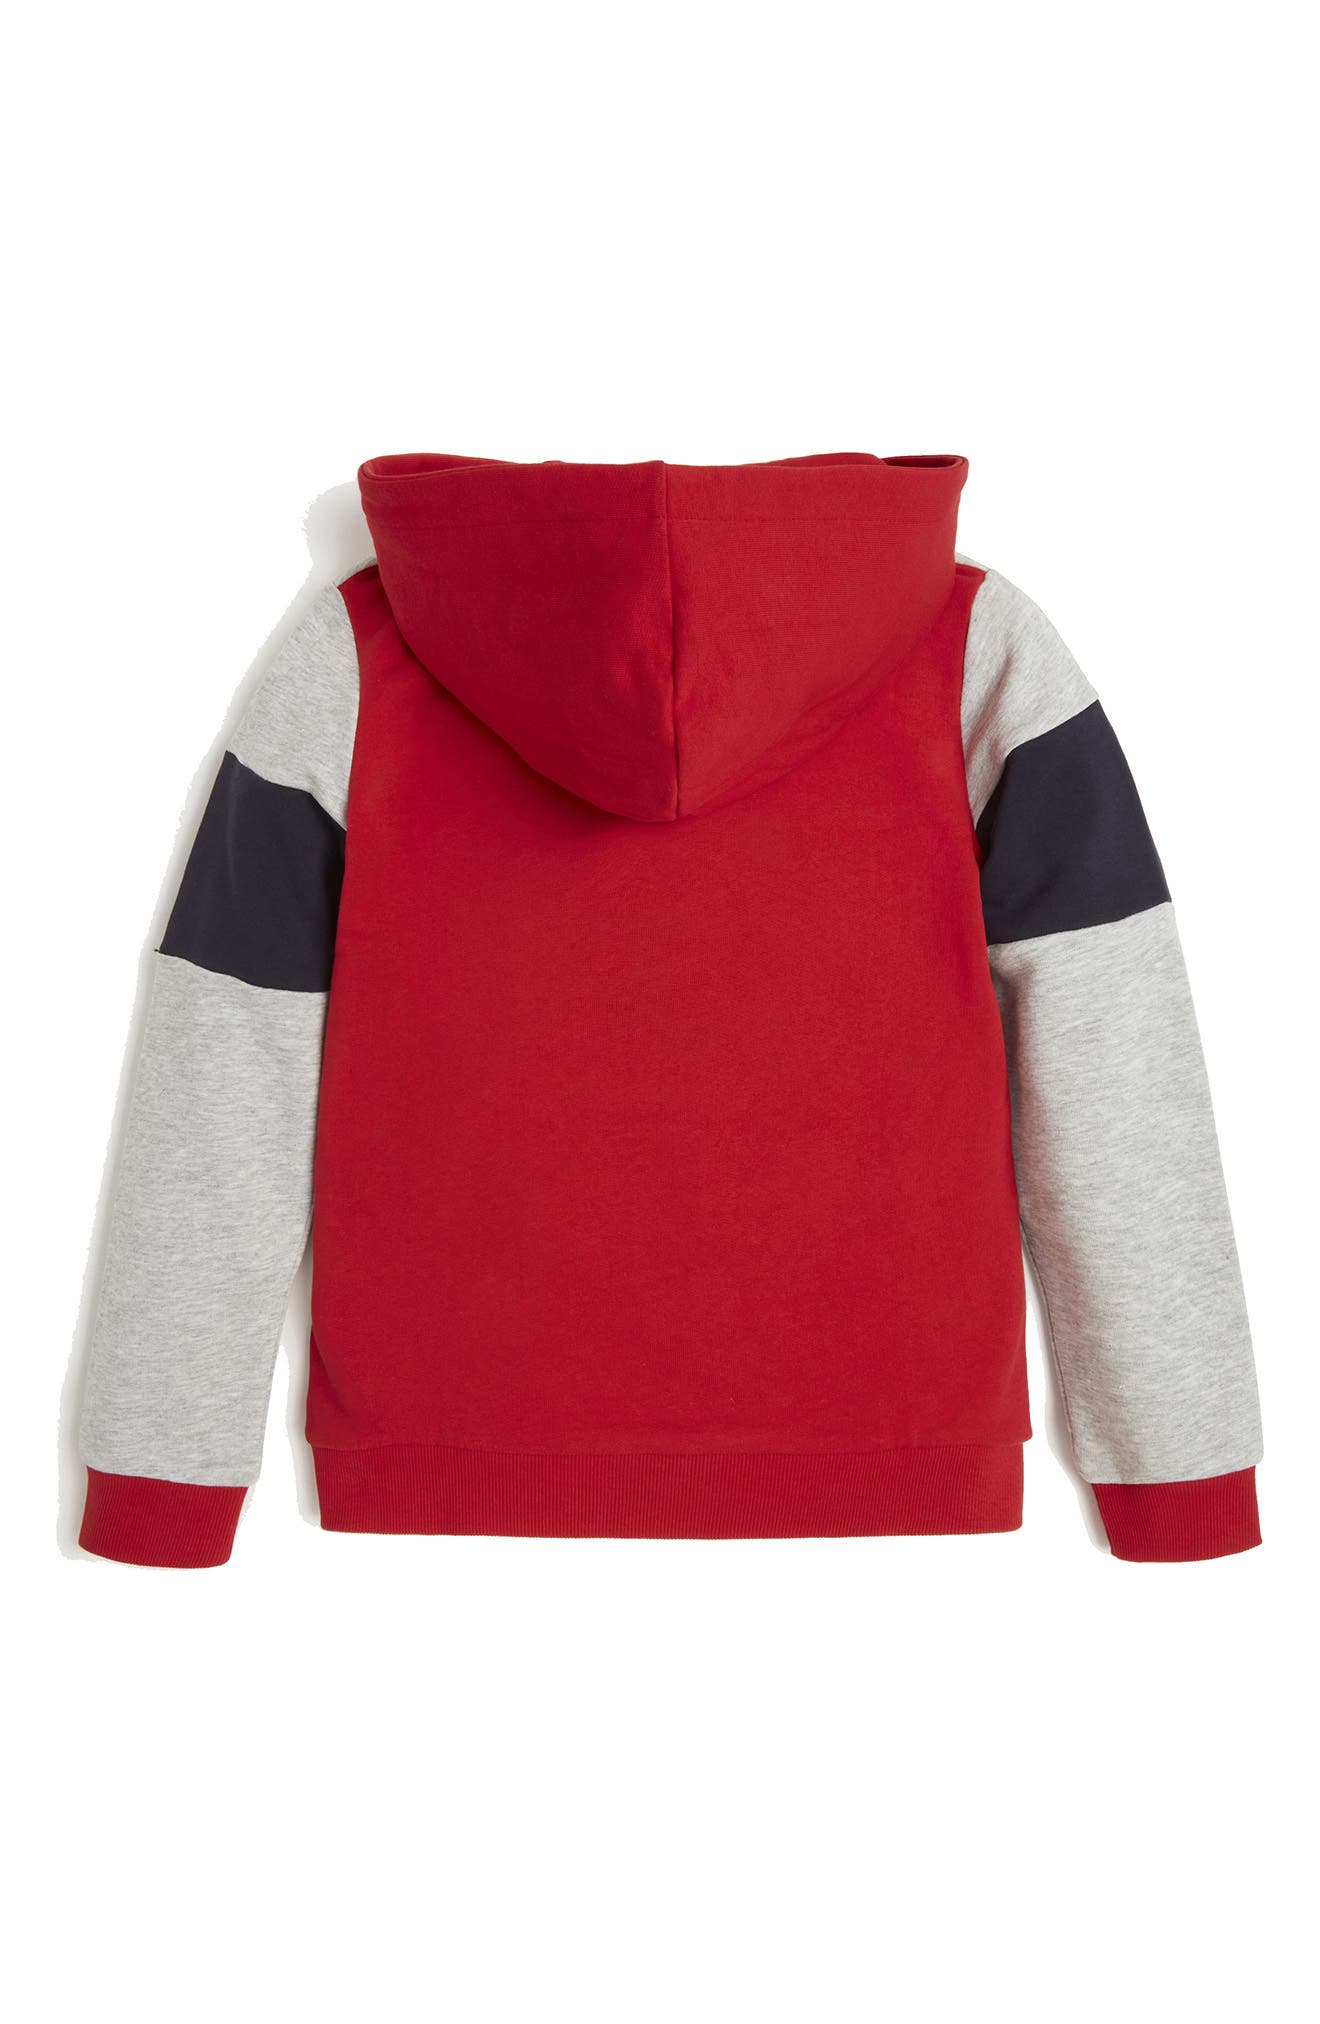 GUESS Boys' Little Organic Knit Stripe Sweater with Texturized Logo 